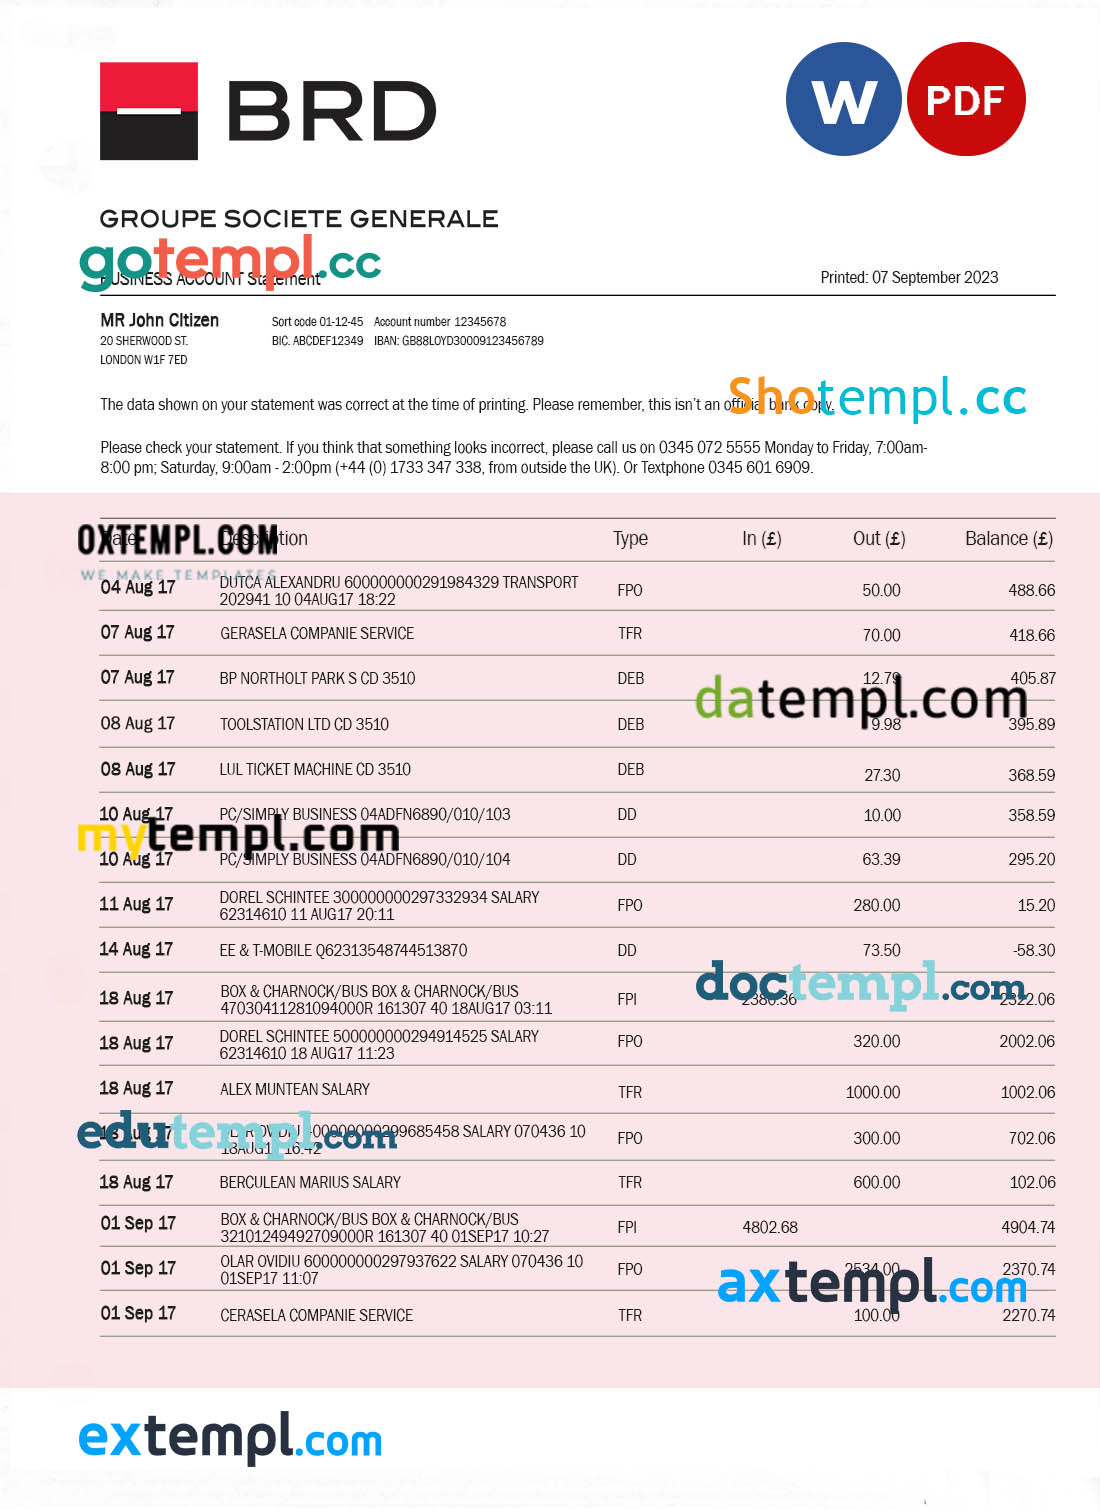 editable template, Brd Bank organization account statement Word and PDF template